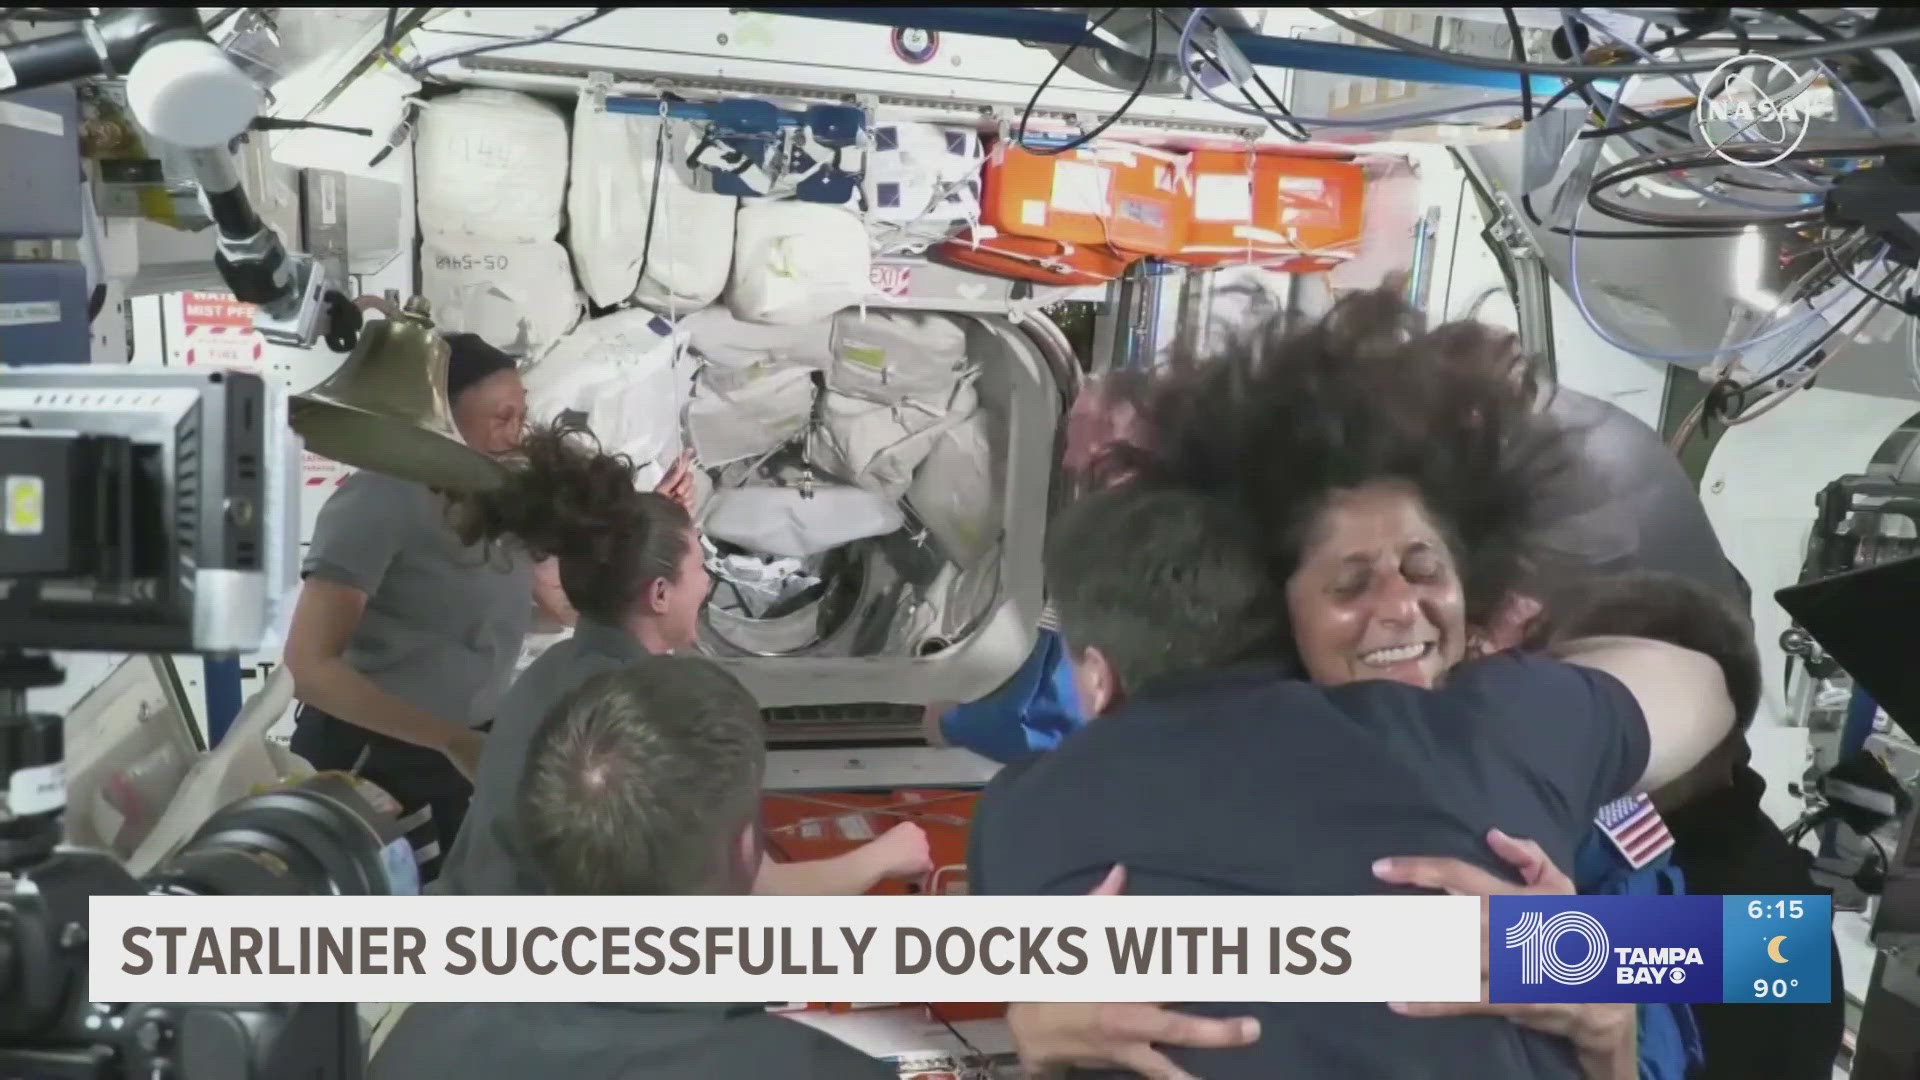 The two astronauts boarded the station just before 4 p.m. on Thursday after the Starliner blasted off Wednesday.